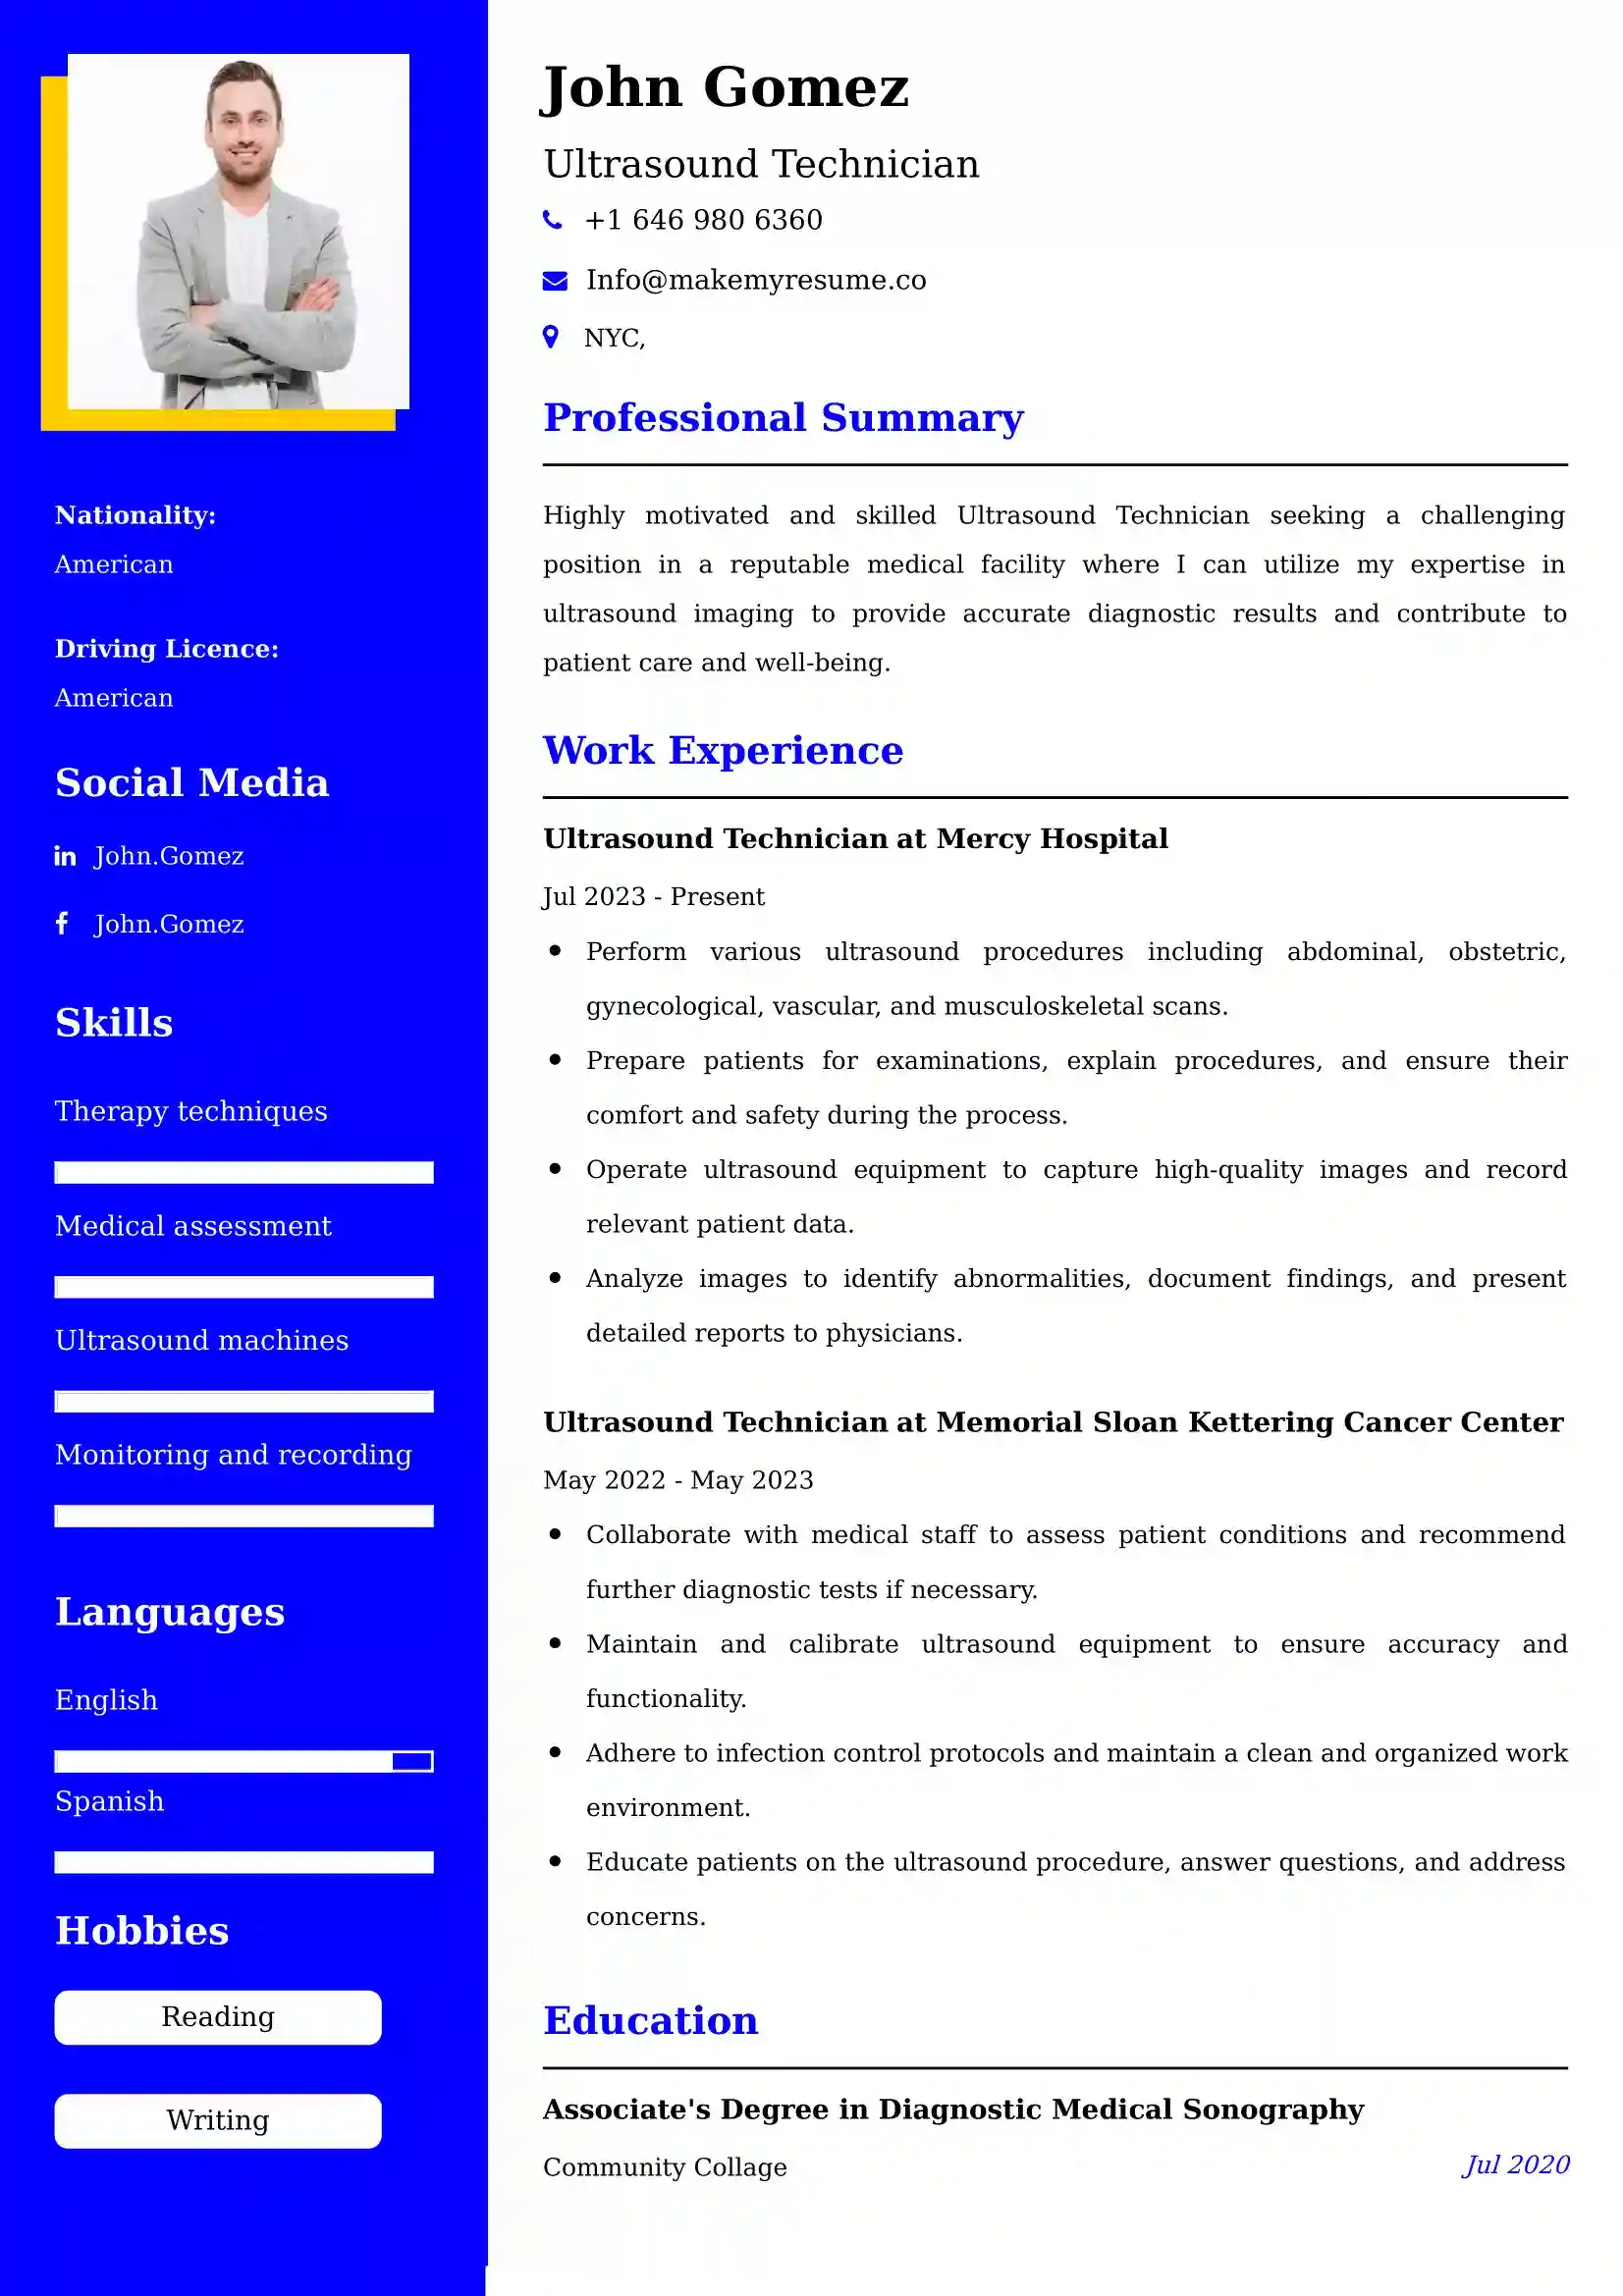 Ultrasound Technician Resume Examples - UK Format, Latest Template.